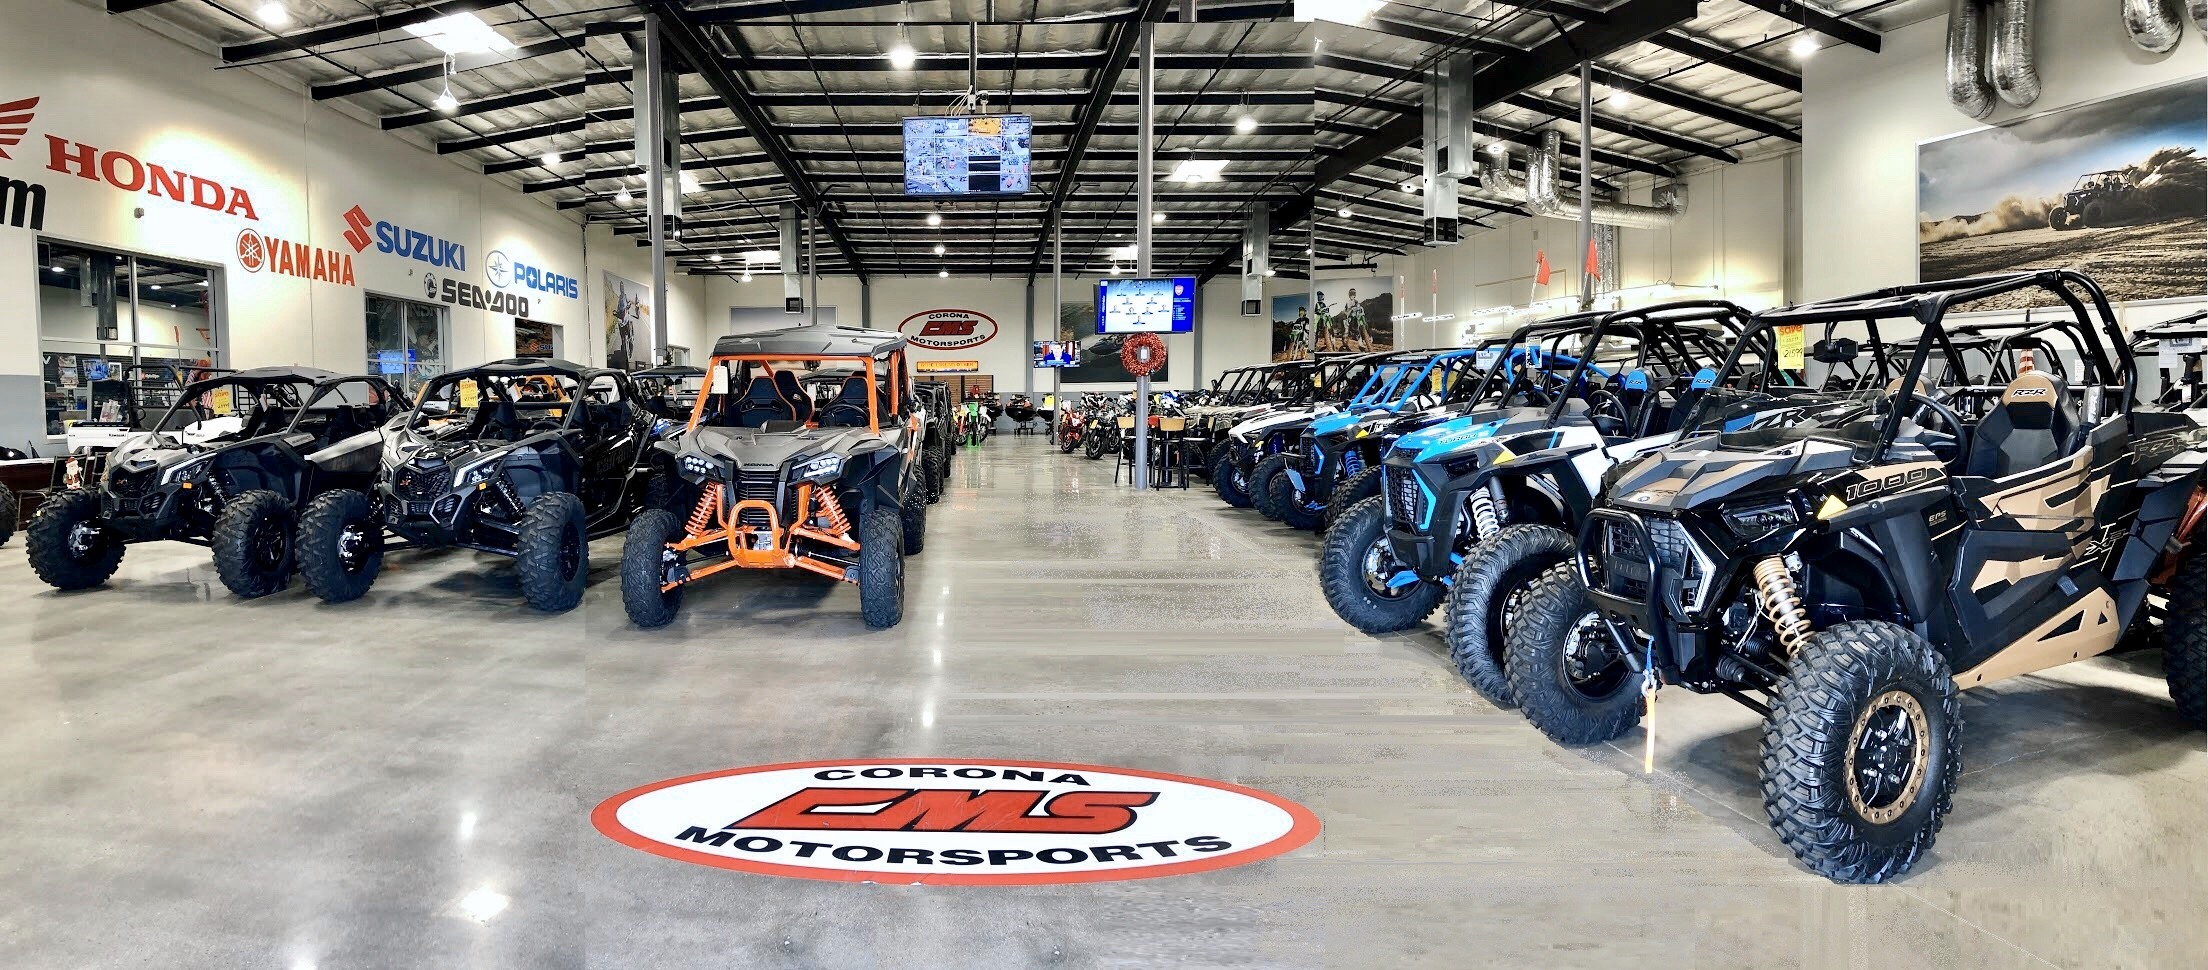 Corona Motorsports Showroom features rows of brightly colored UTVs and motorcycles.